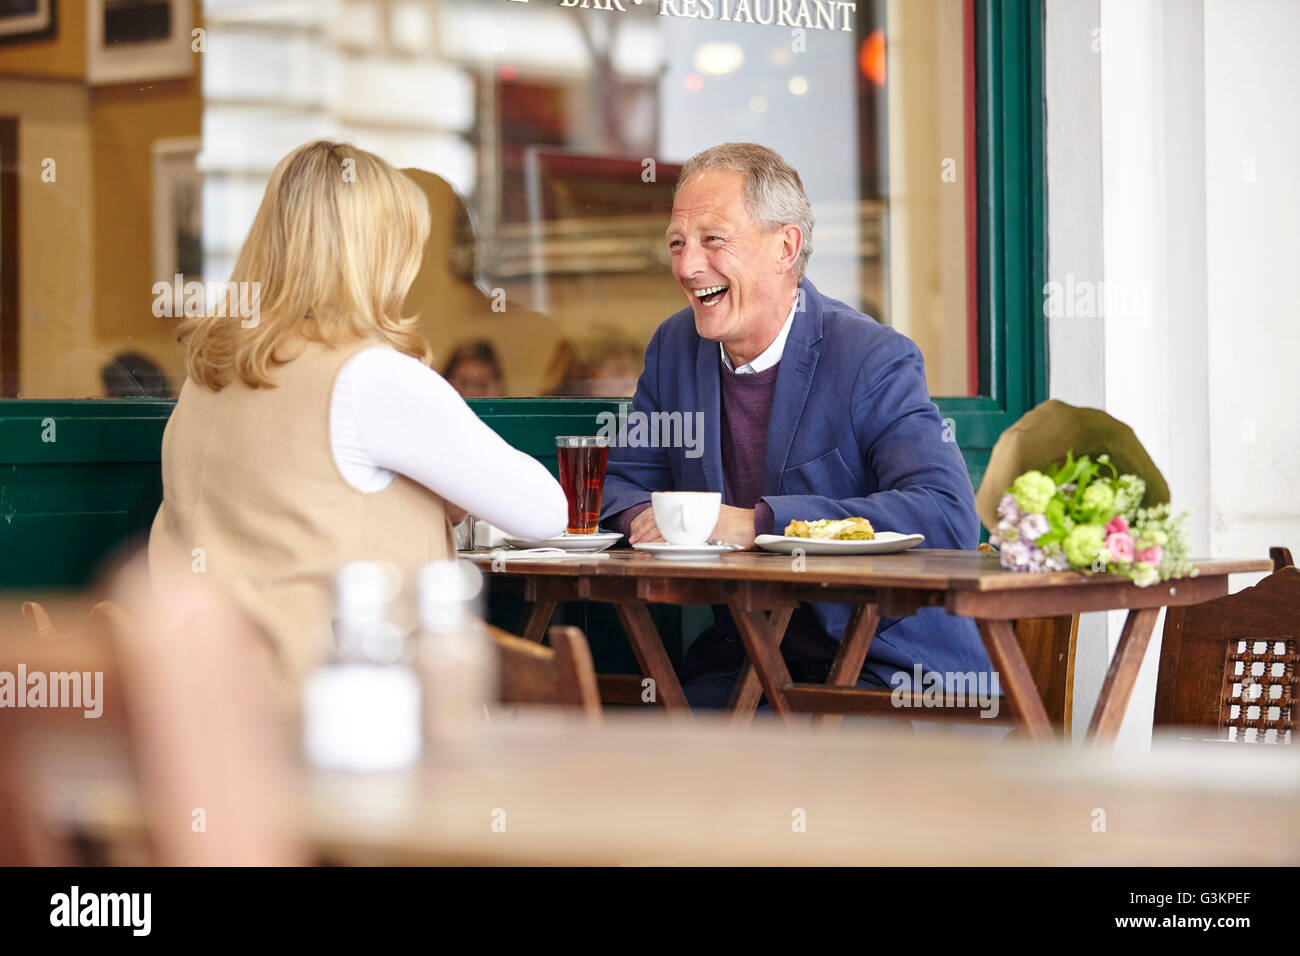 Mature couple on date laughing together at sidewalk cafe table Stock Photo